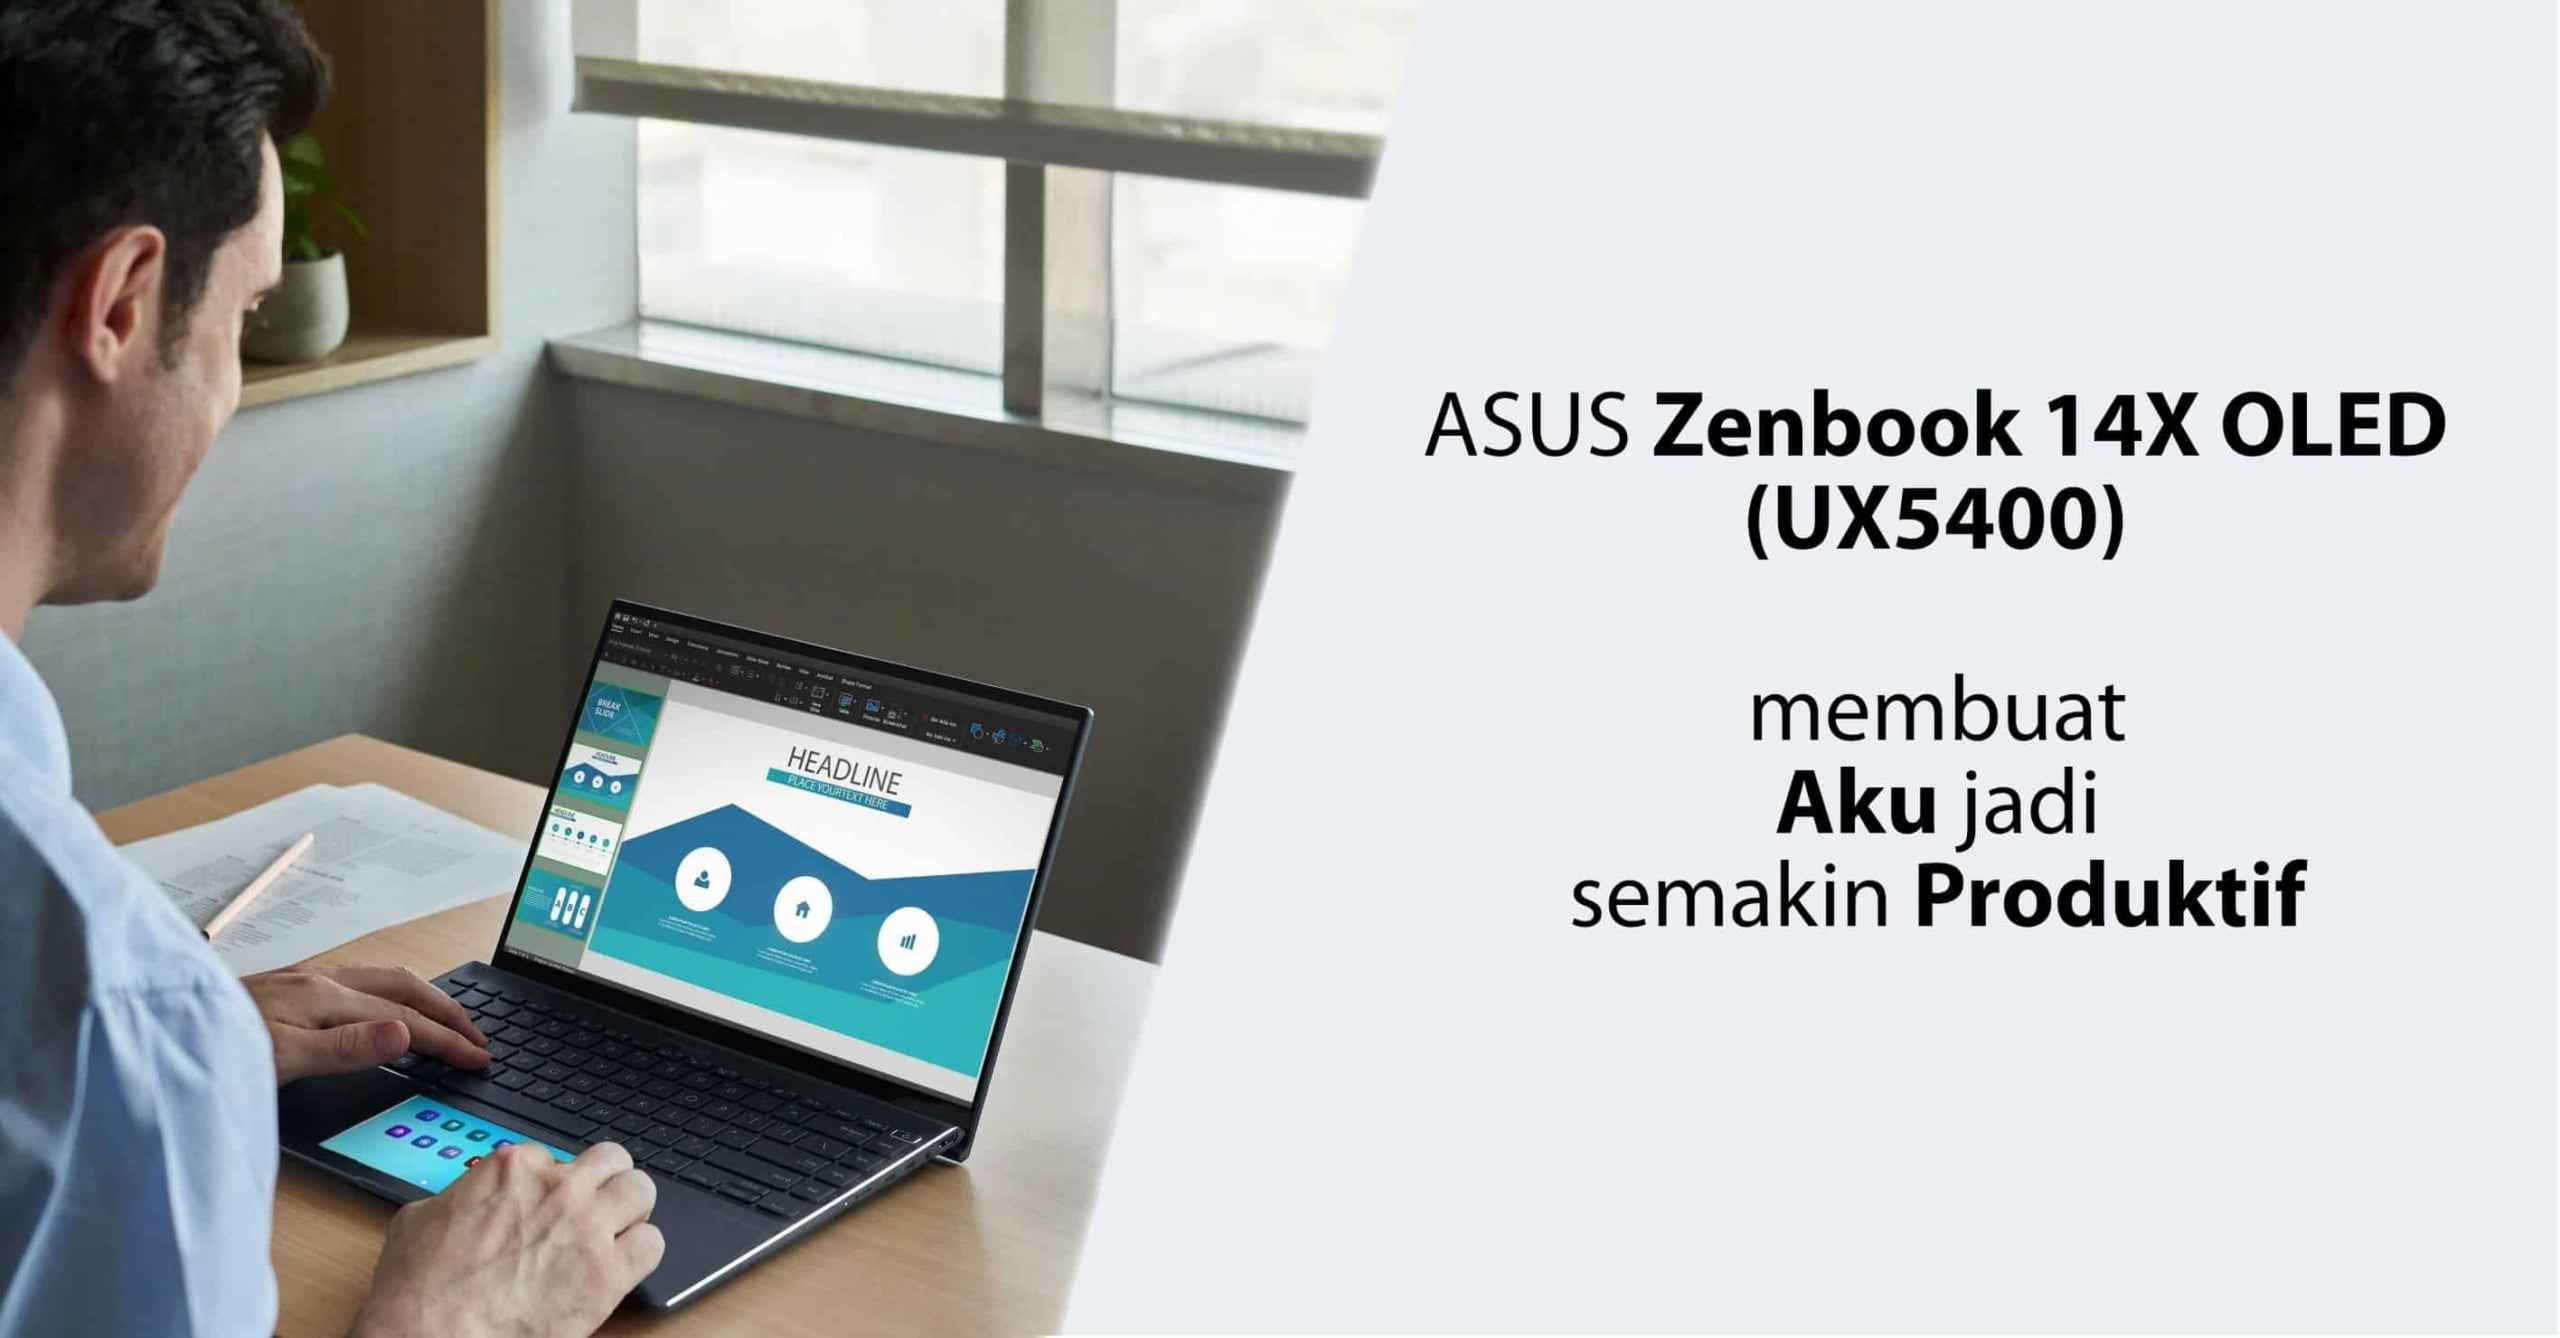 ASUS Zenbook 14X OLED UX5400 scaled